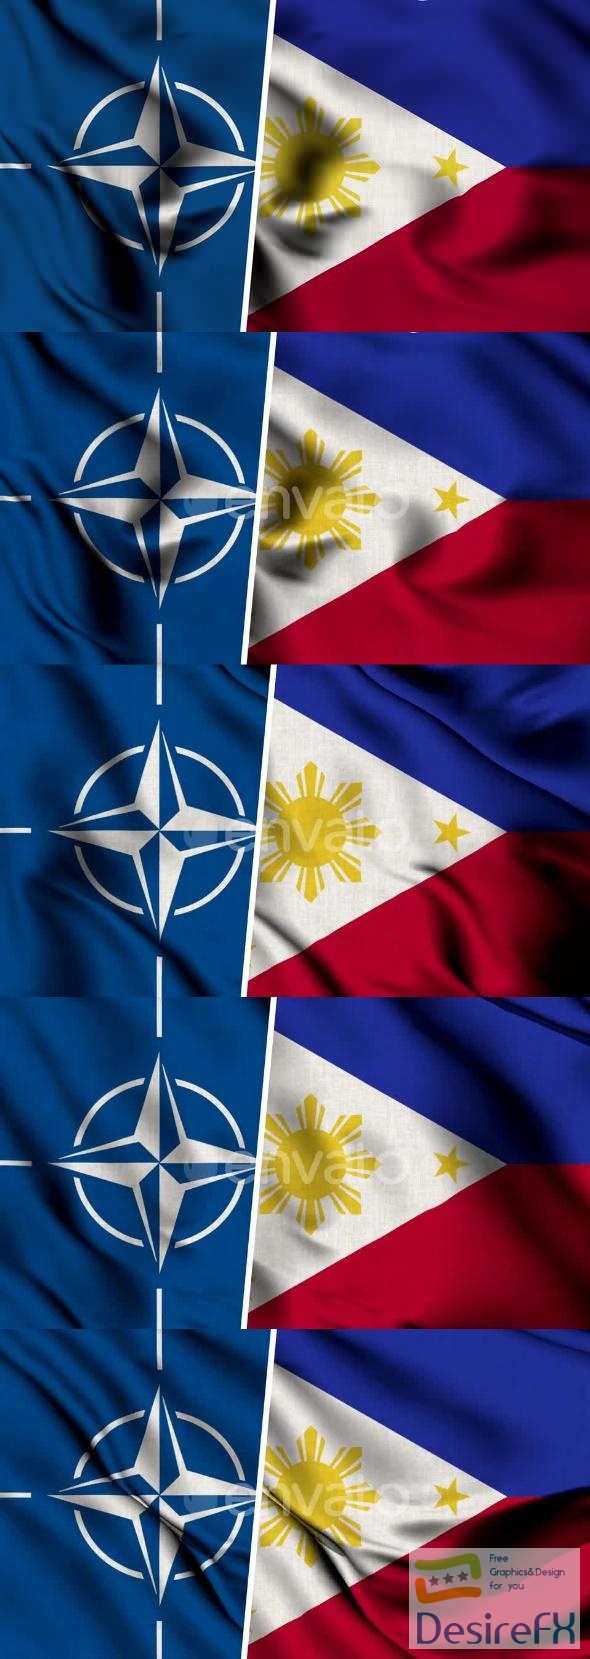 VideoHive Nato Flag And Flag Of Philippines 47577934